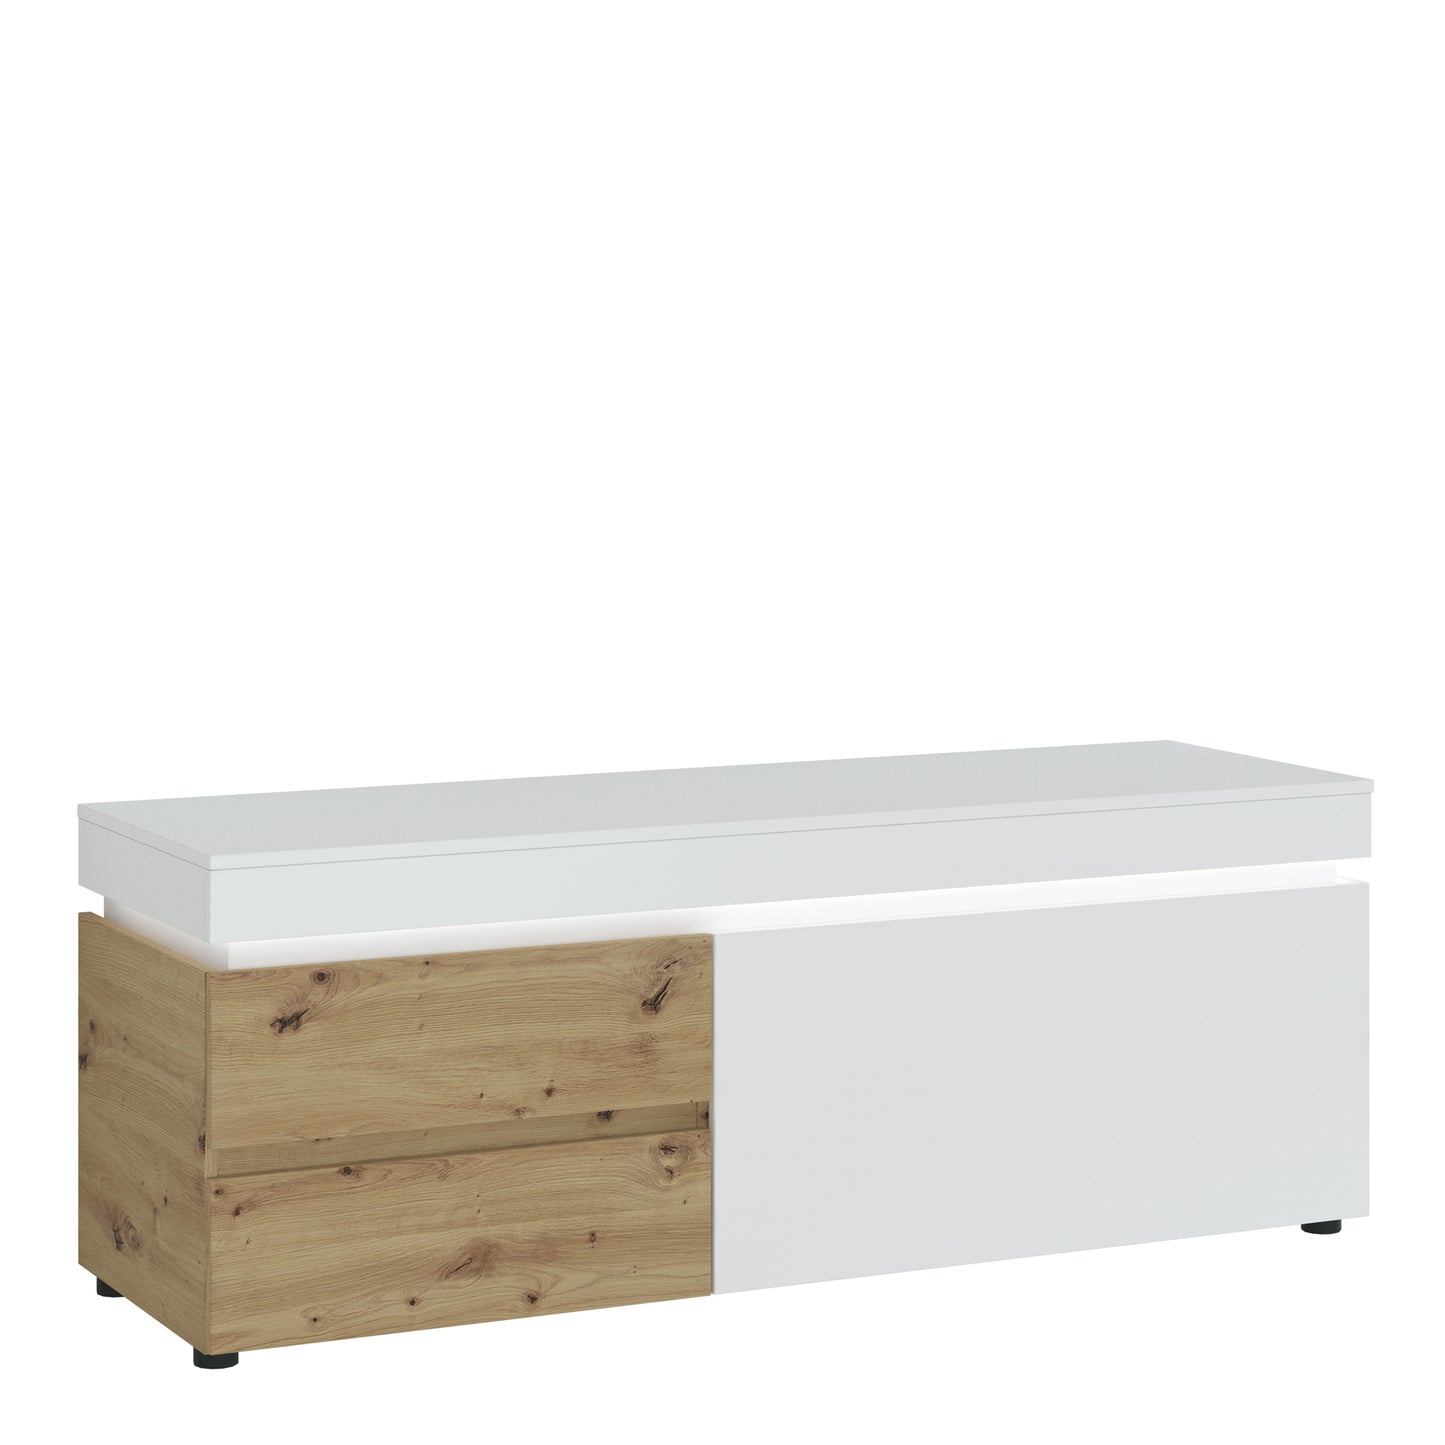 Luci Bright Luci 1 door 2 drawer 150 cm TV unit (including LED lighting) in White and Oak